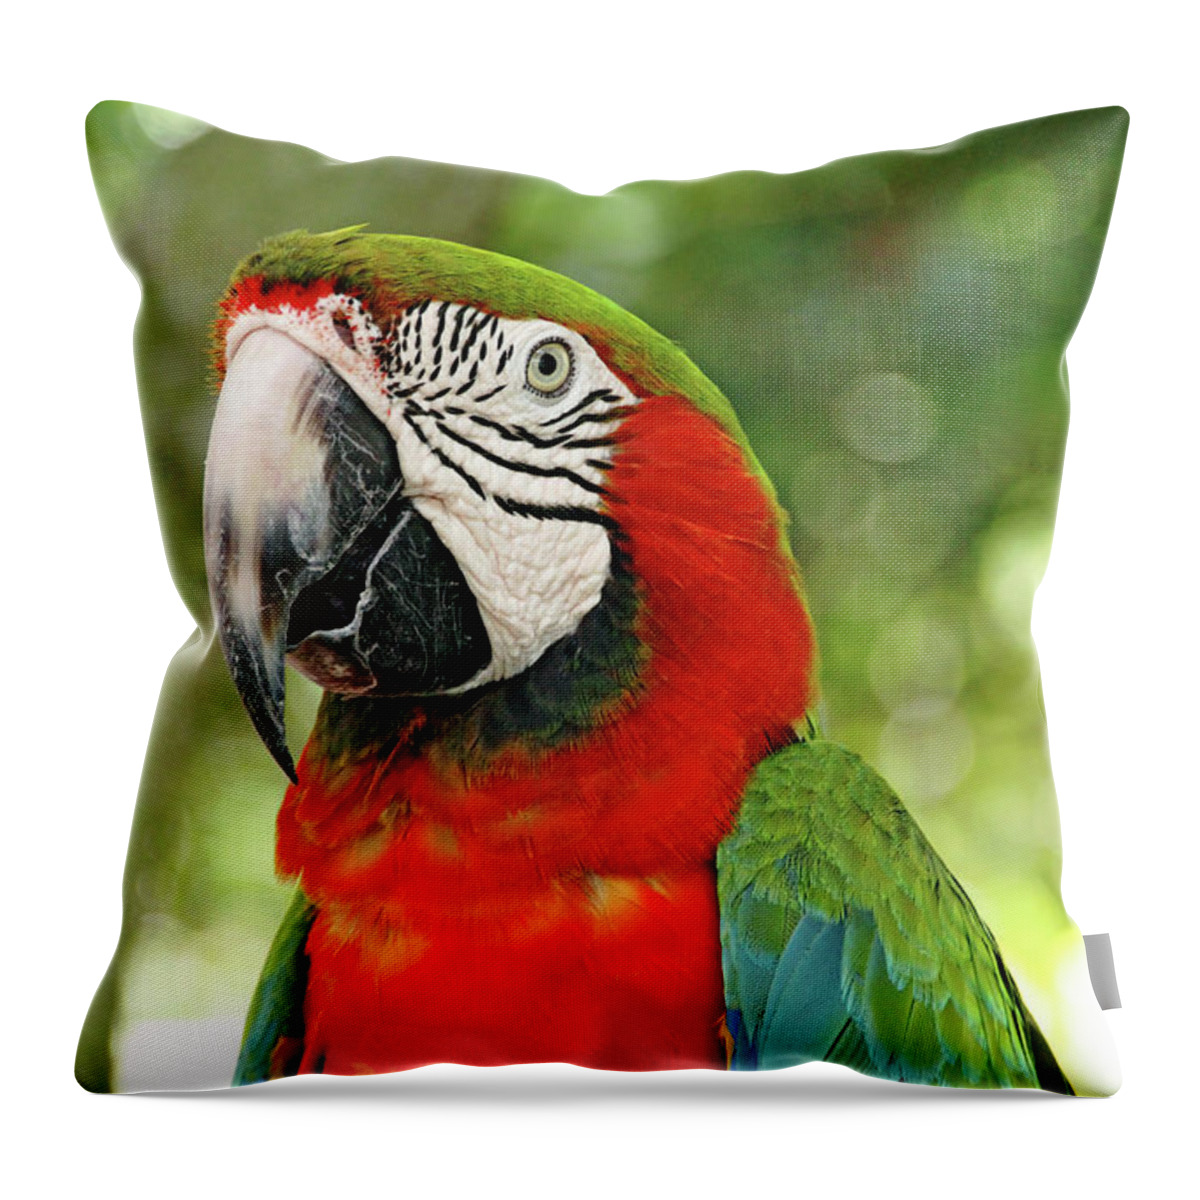 Macaw Throw Pillow featuring the photograph Vibrant Macaw by Debbie Oppermann